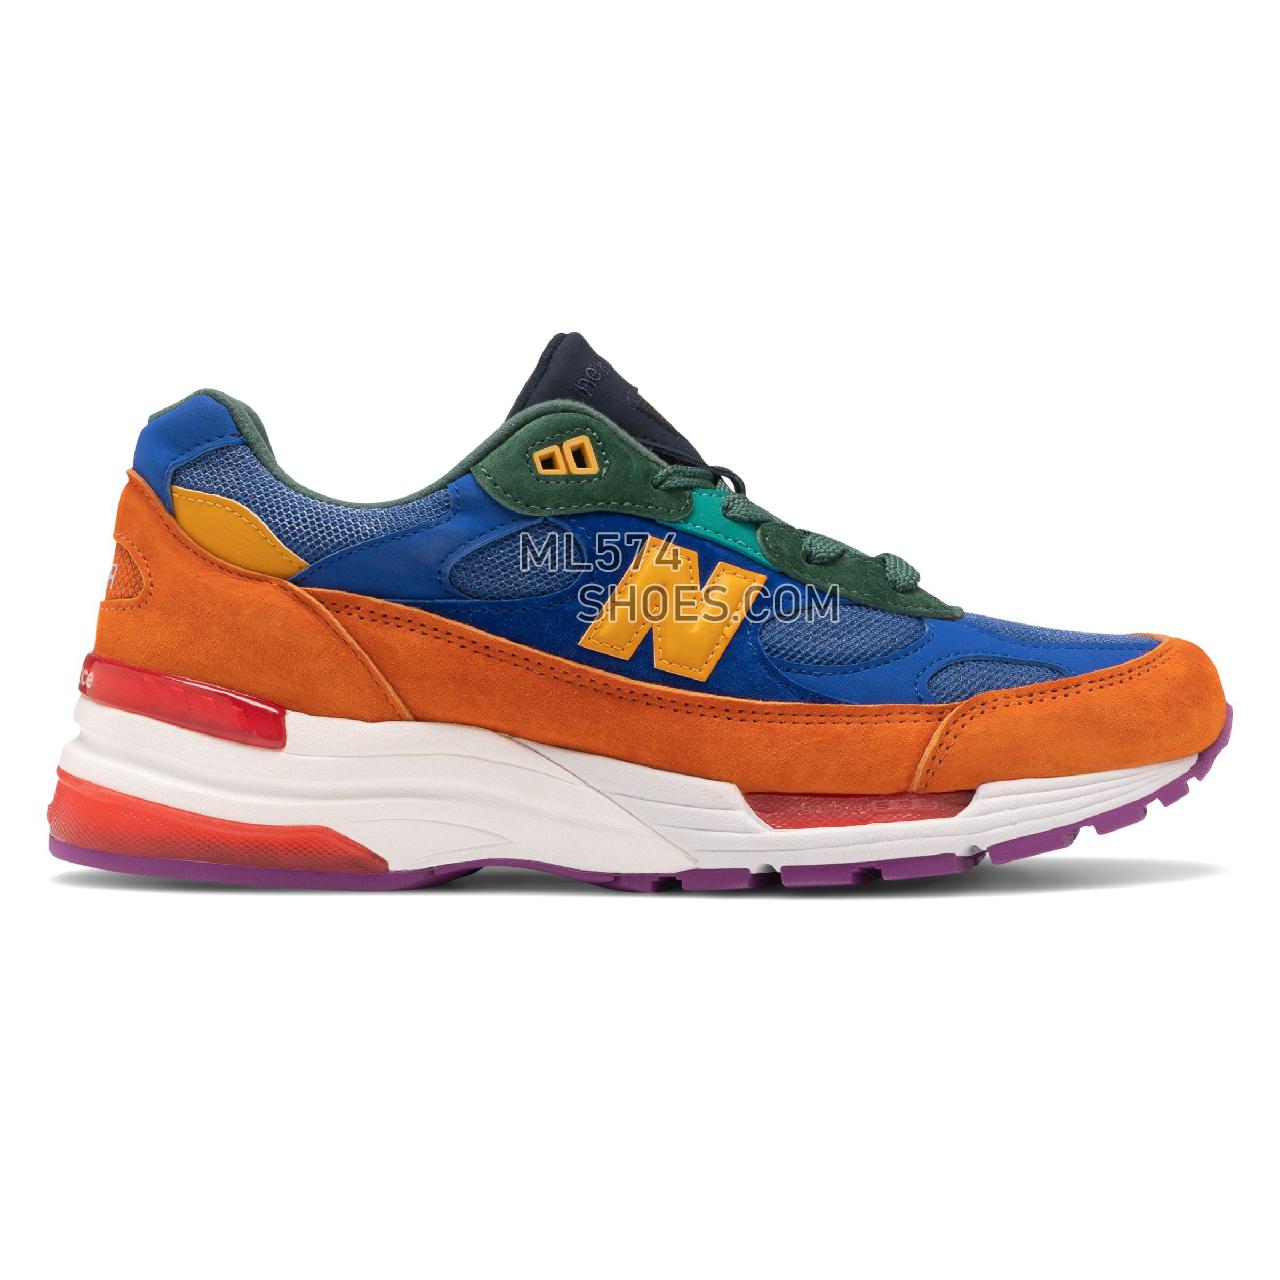 New Balance Made in US 992 - Men's Made in US 992 Classic - Orange with Blue - M992MC